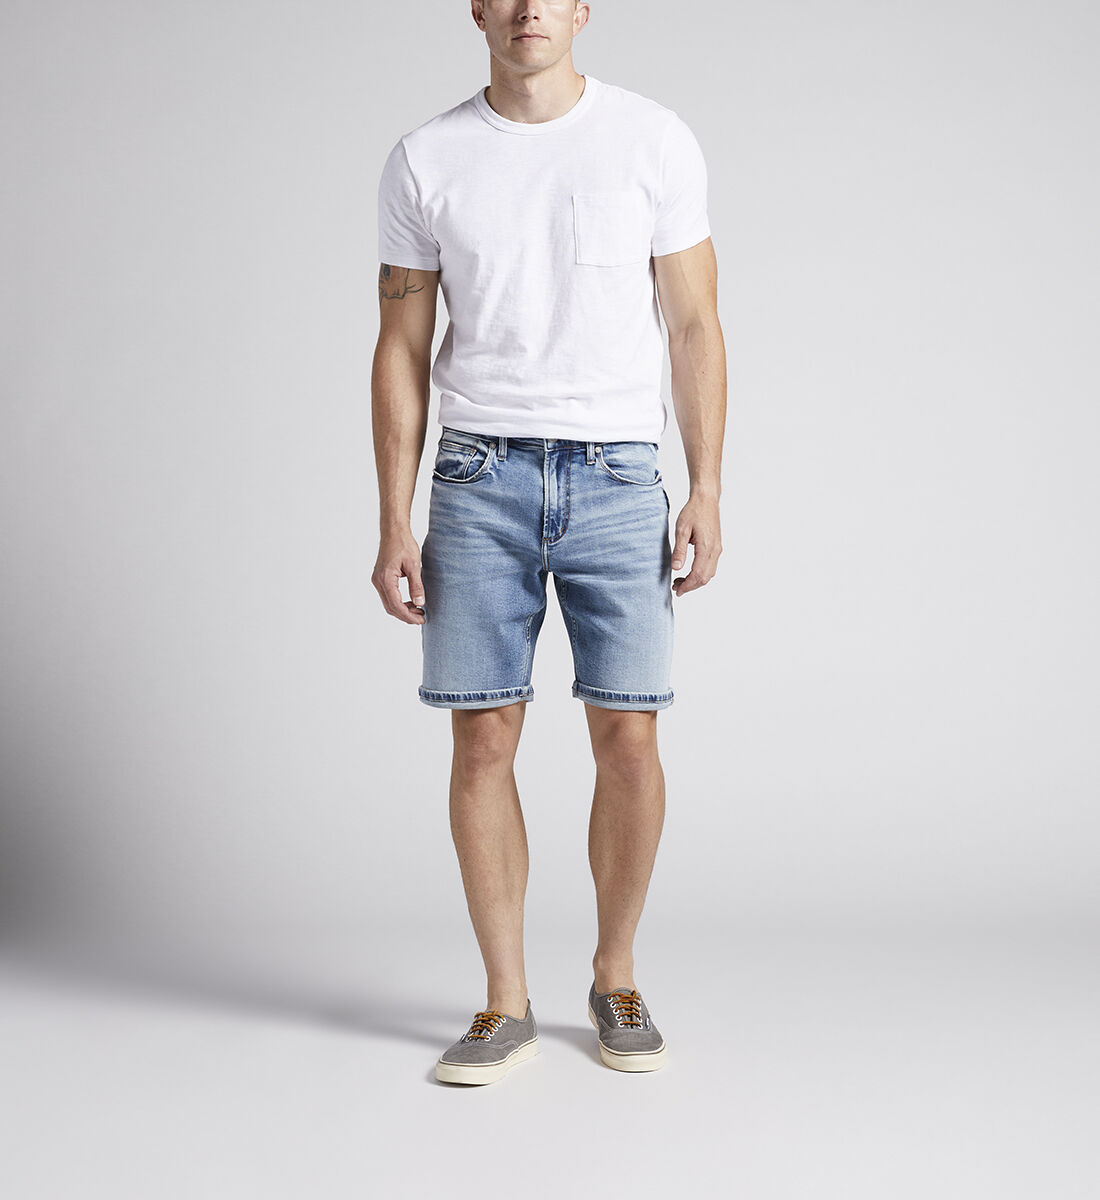 Machray Classic Fit Short Front